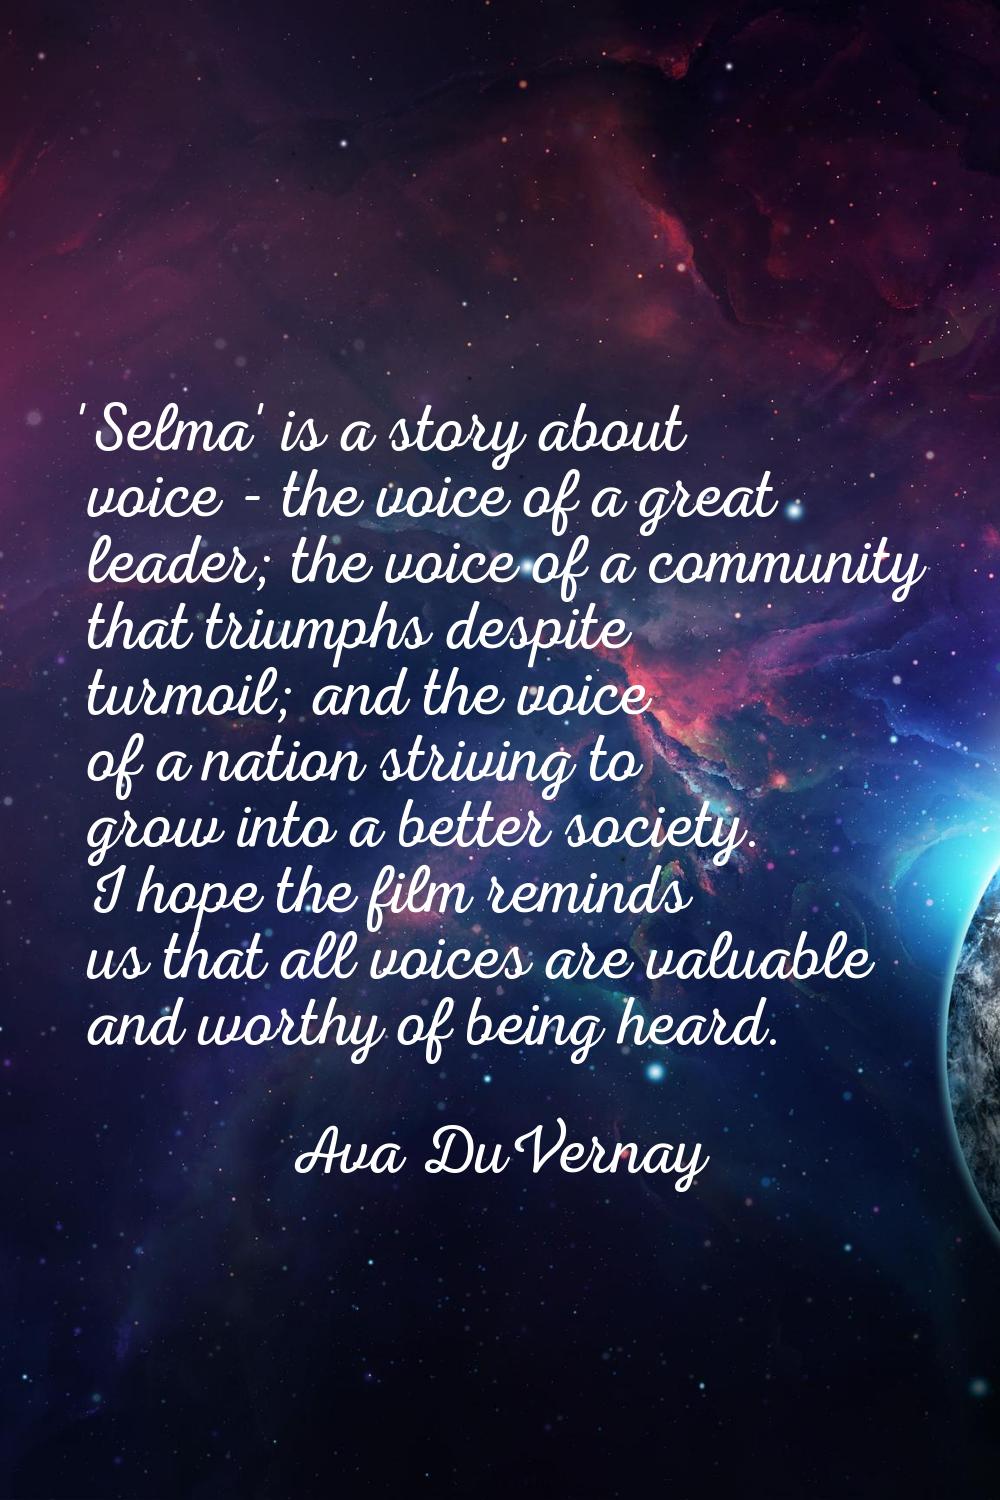 'Selma' is a story about voice - the voice of a great leader; the voice of a community that triumph